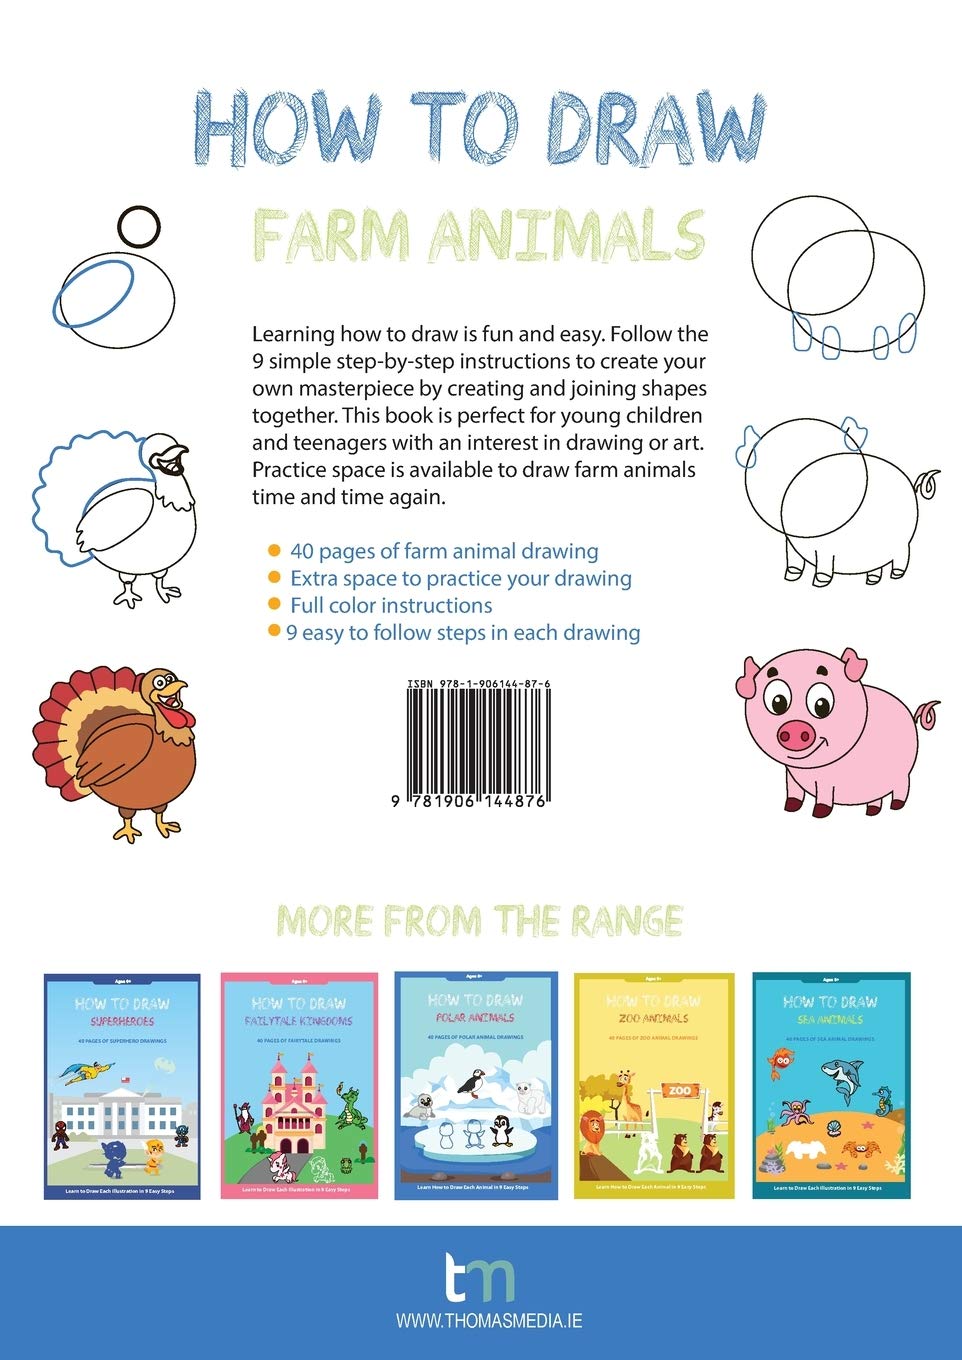 How to Draw Farm Animals Step by Step for kids and Beginner Adults